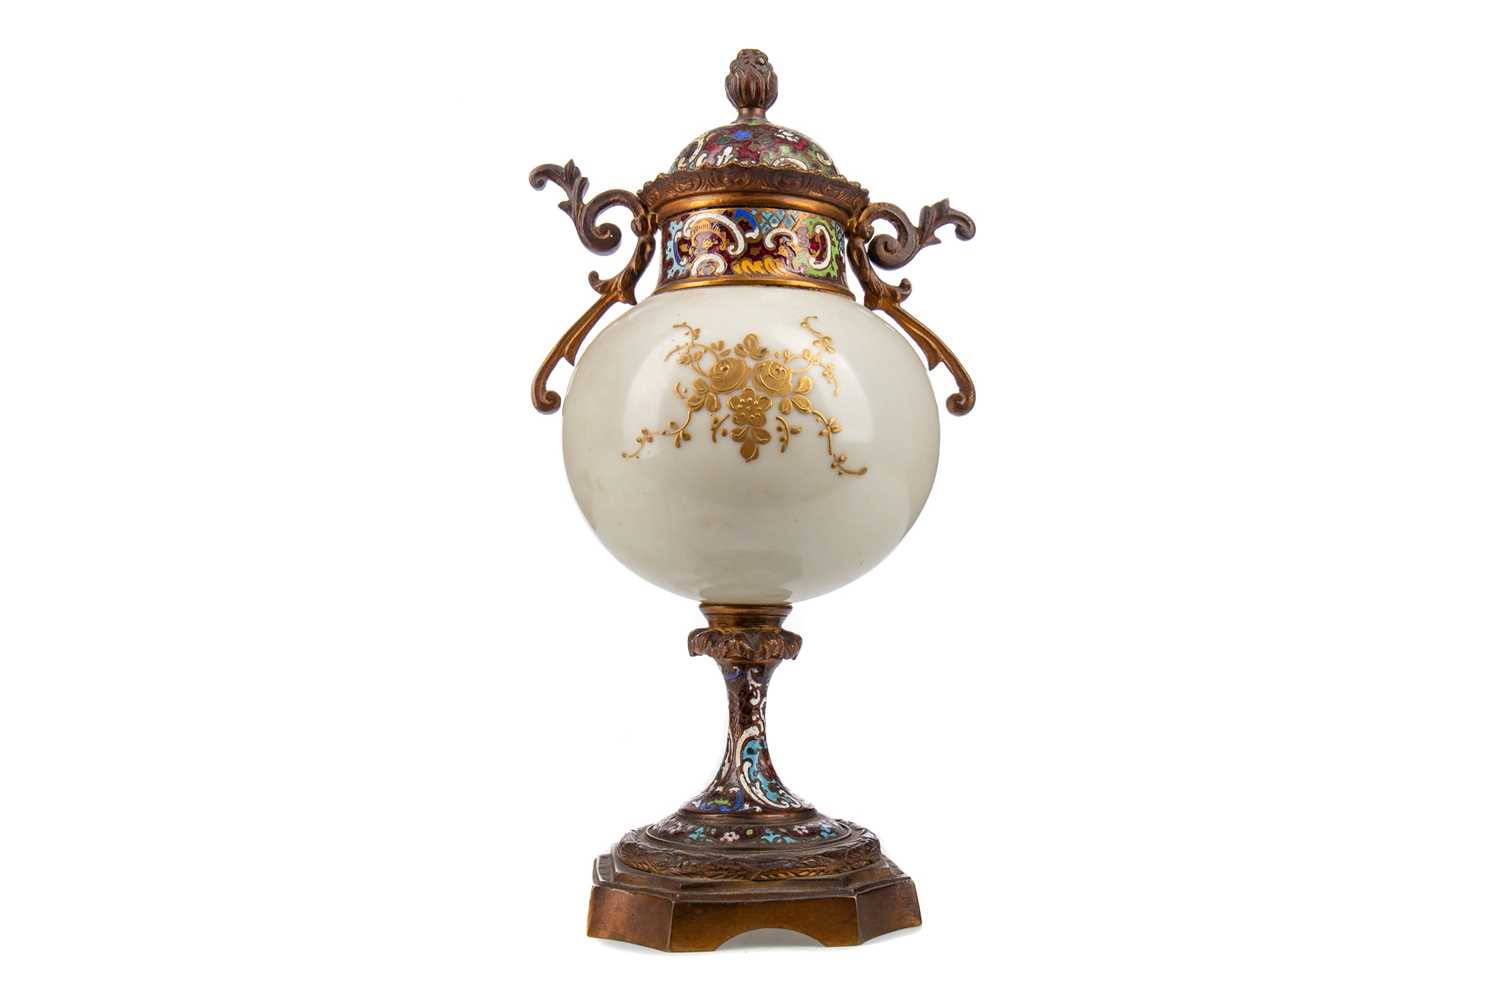 A LATE 19TH CENTURY FRENCH PORCELAIN, GILT METAL AND CHAMPLEVE ENAMEL URN - Image 3 of 3